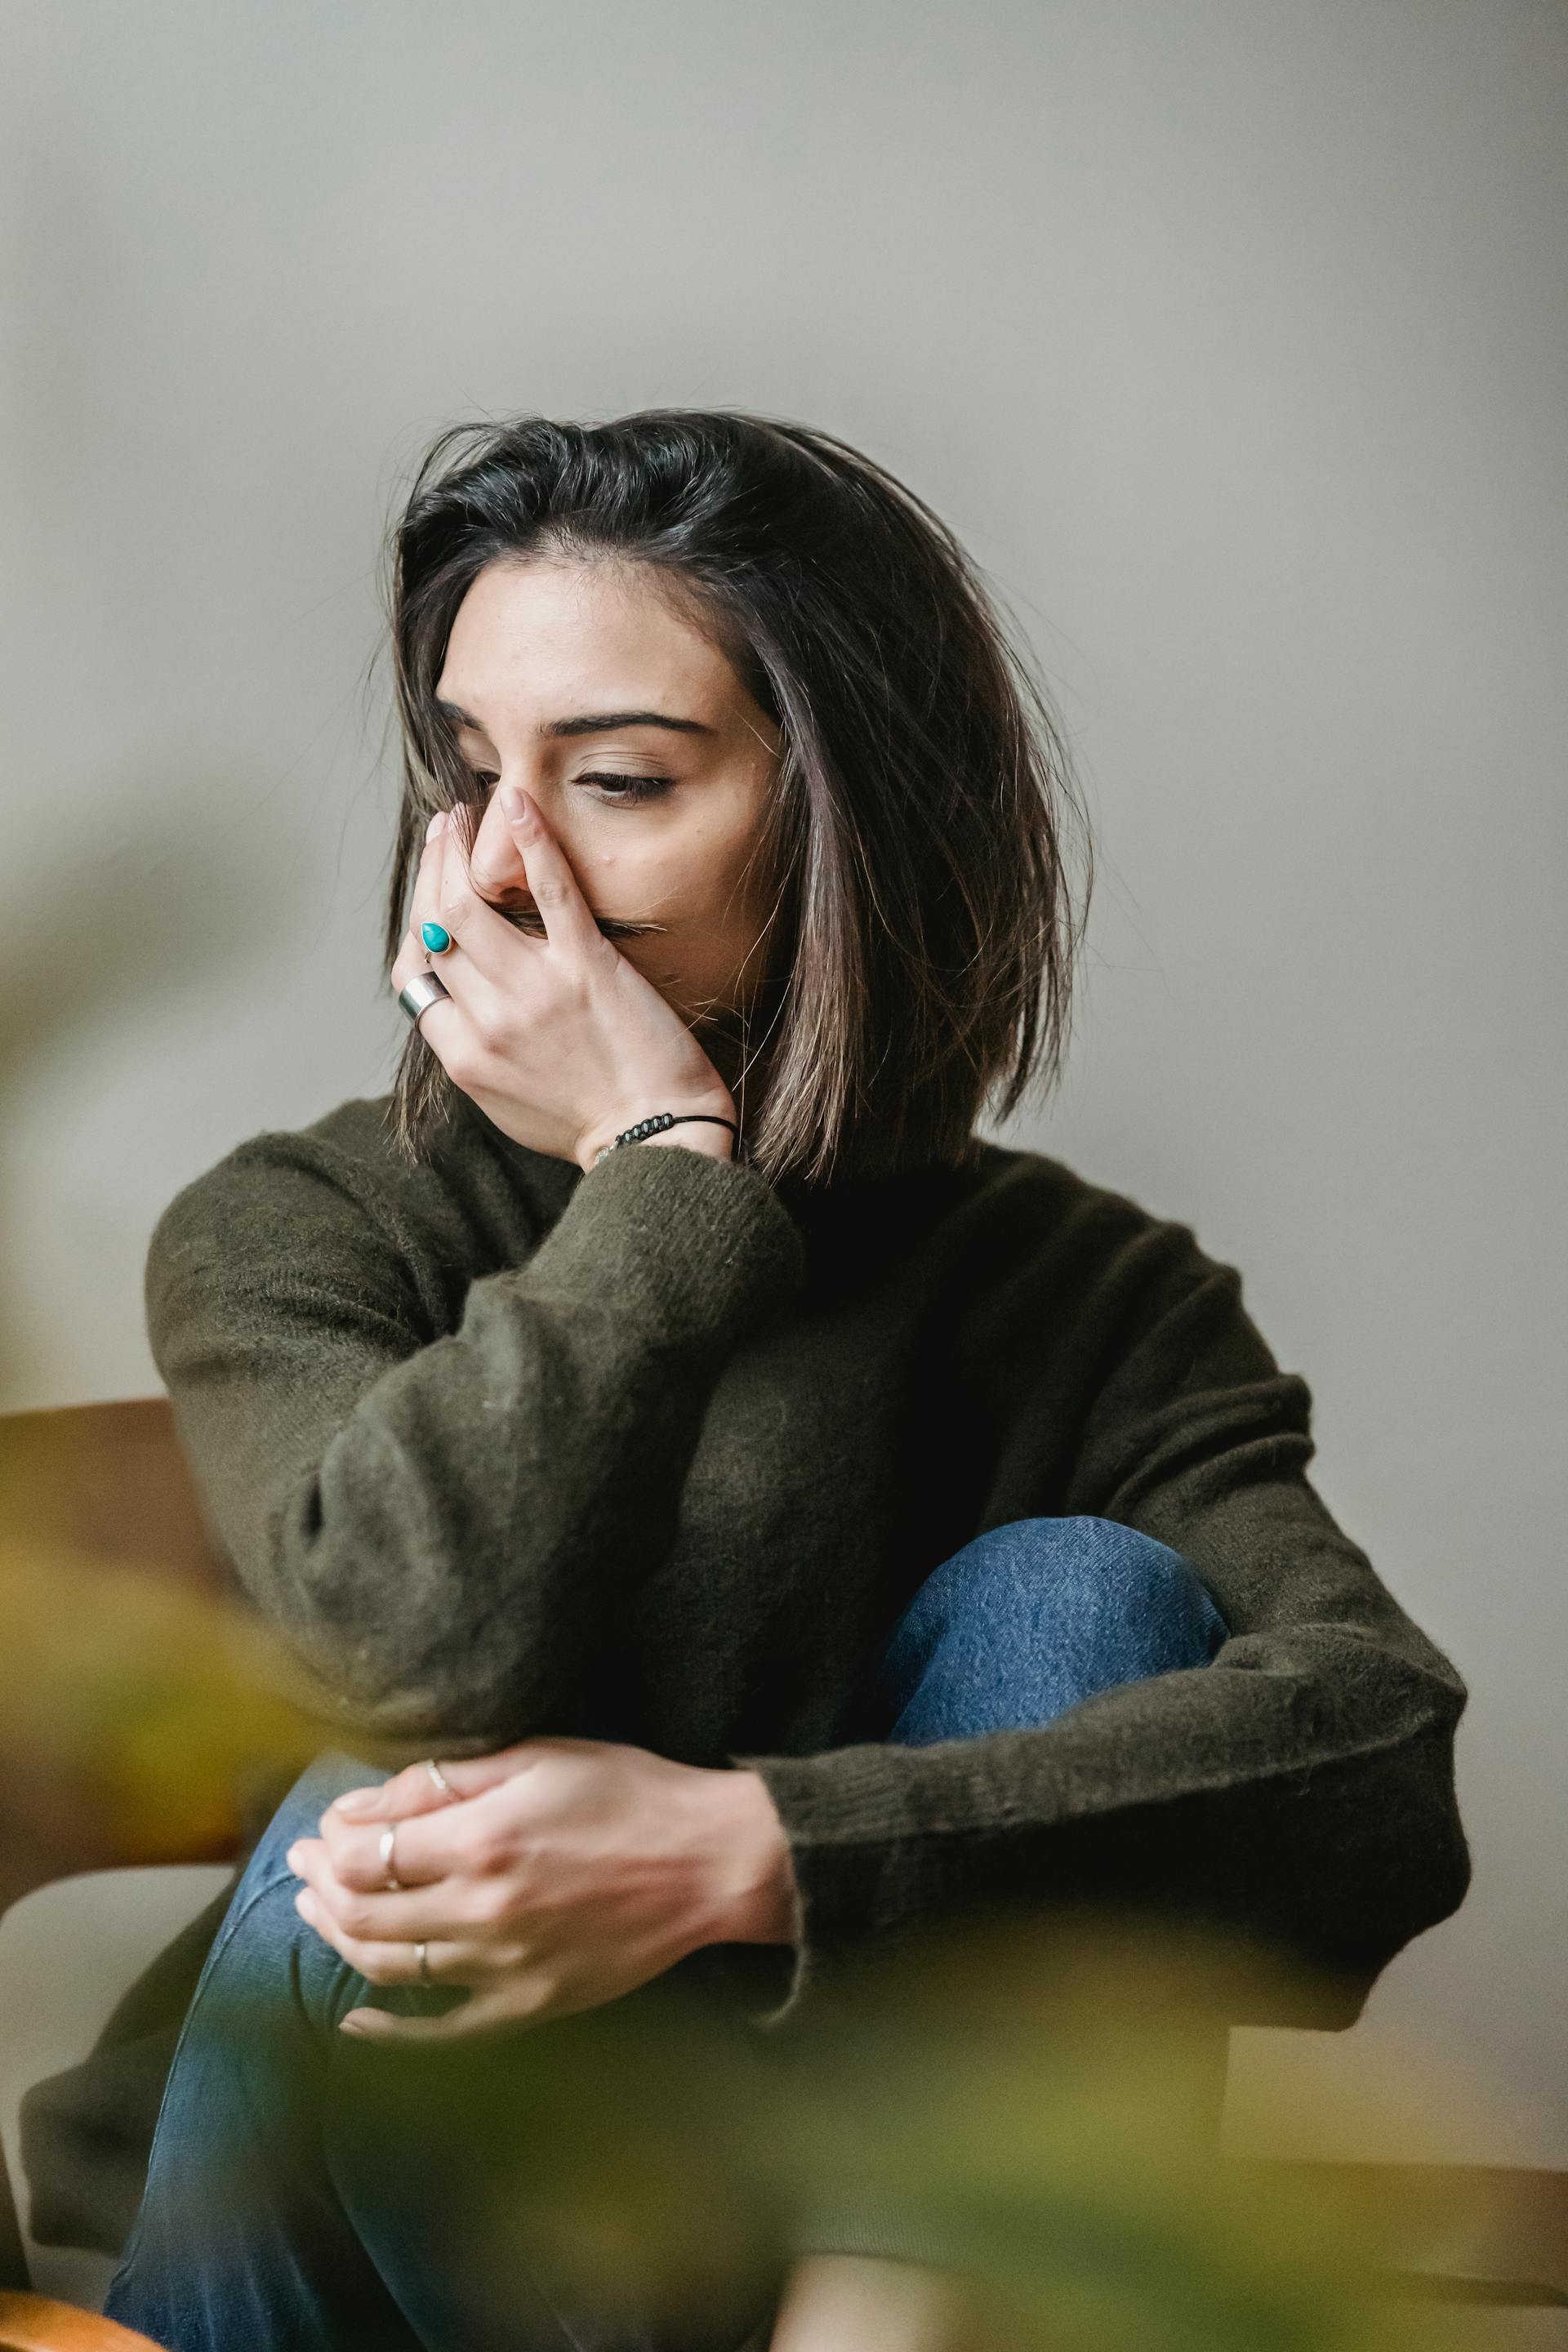 A sad woman sitting on the couch | Source: Pexels